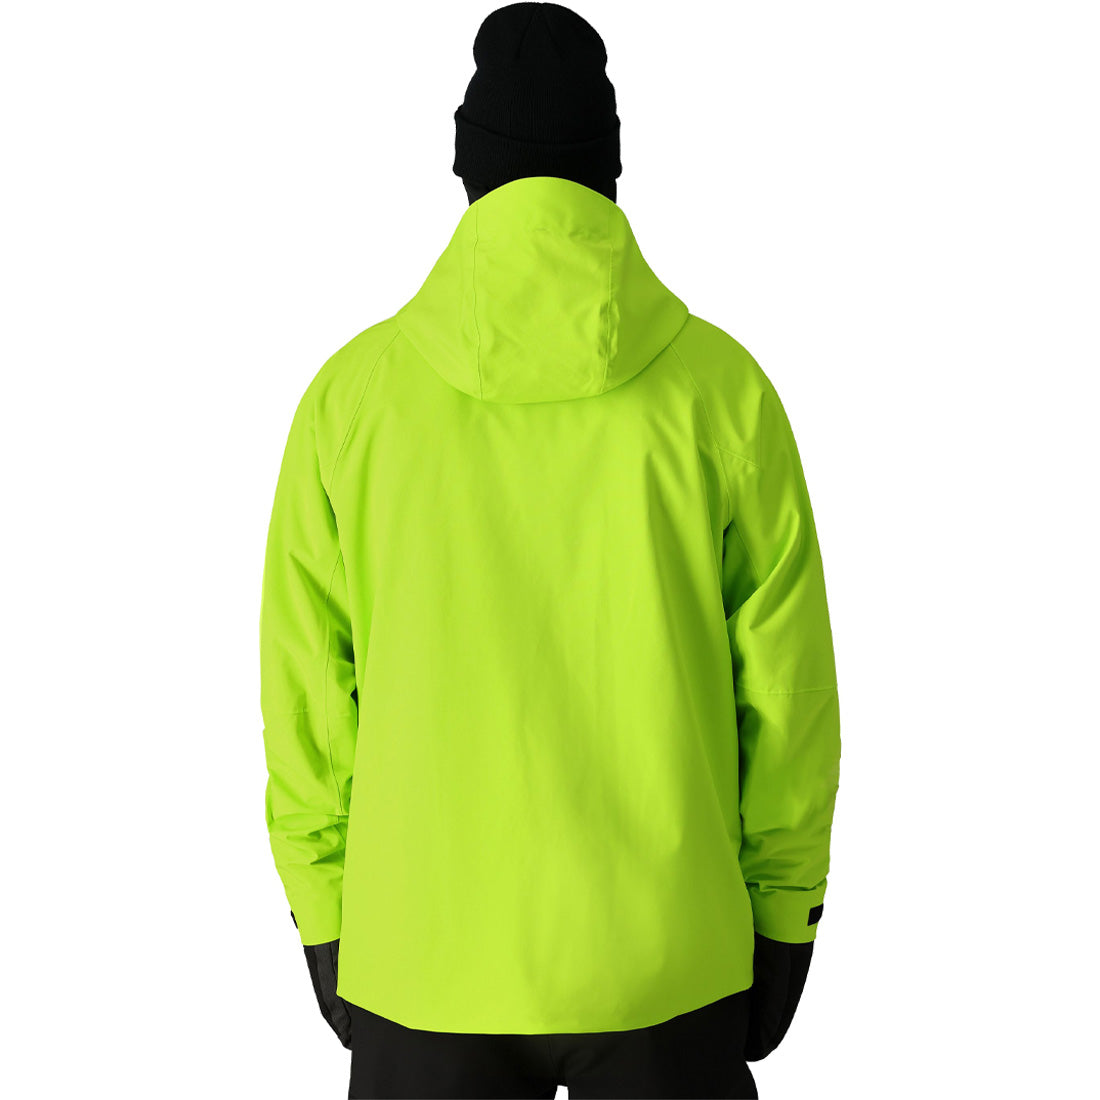 686 Hydra Thermagraph Jacket - Men's